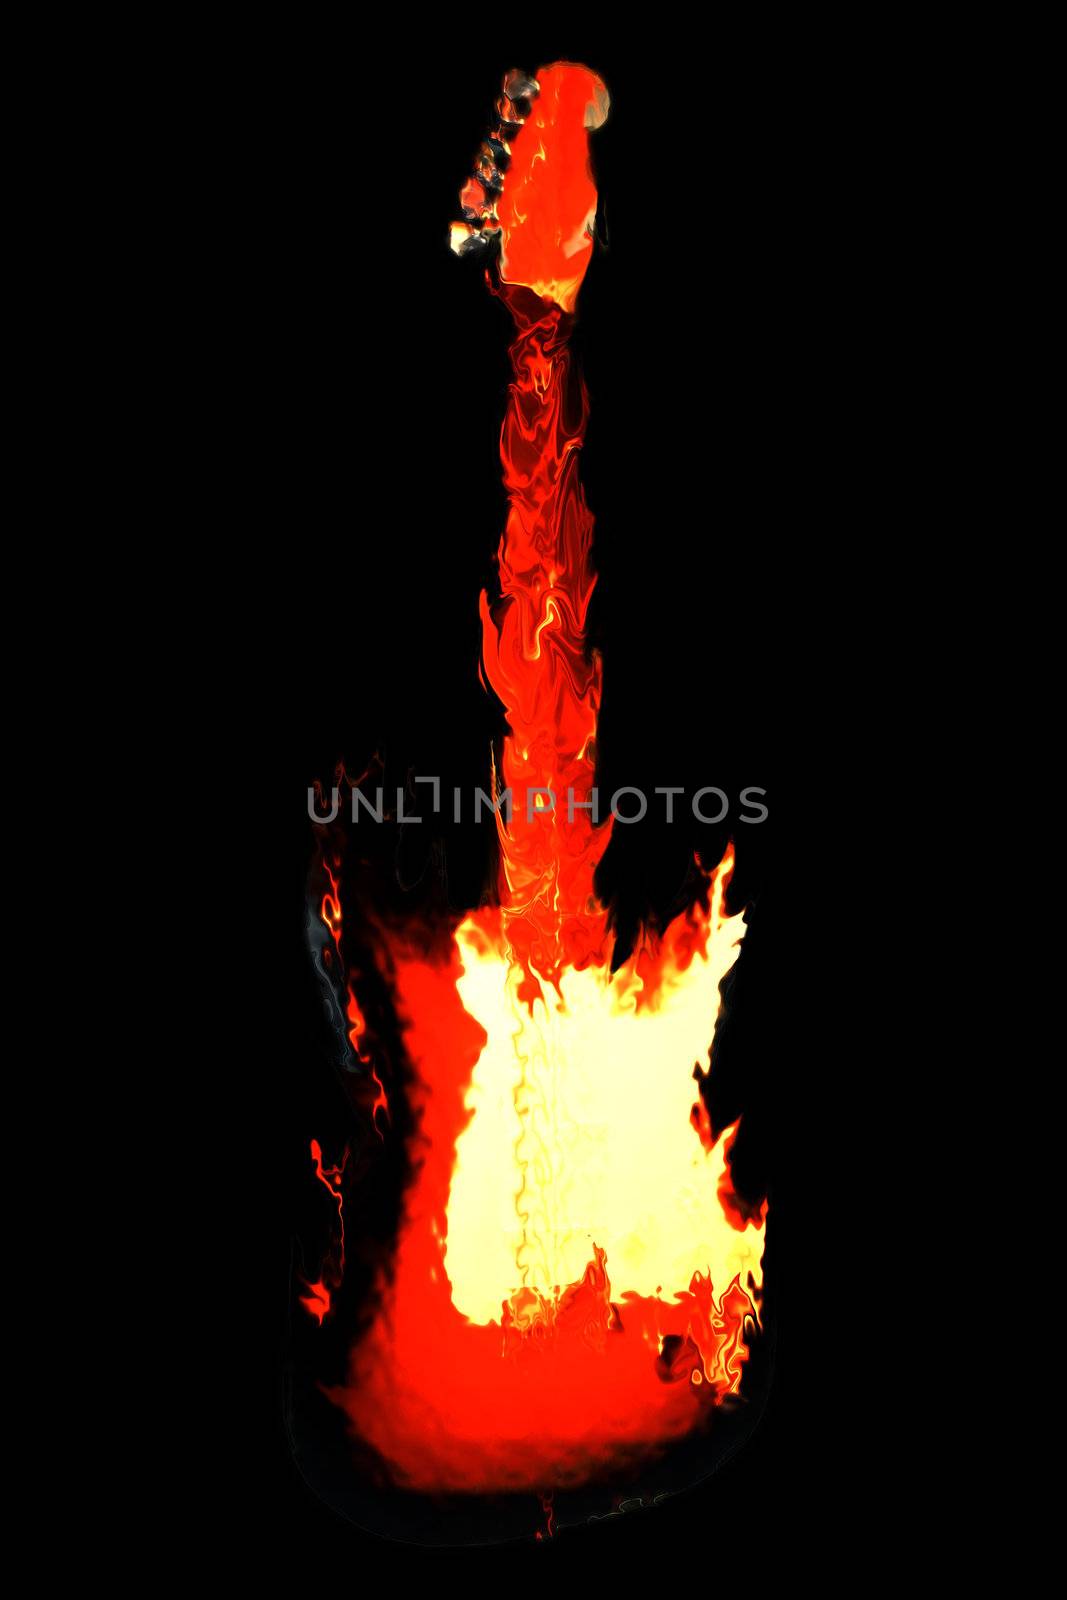 An electric guitar in flames on black background